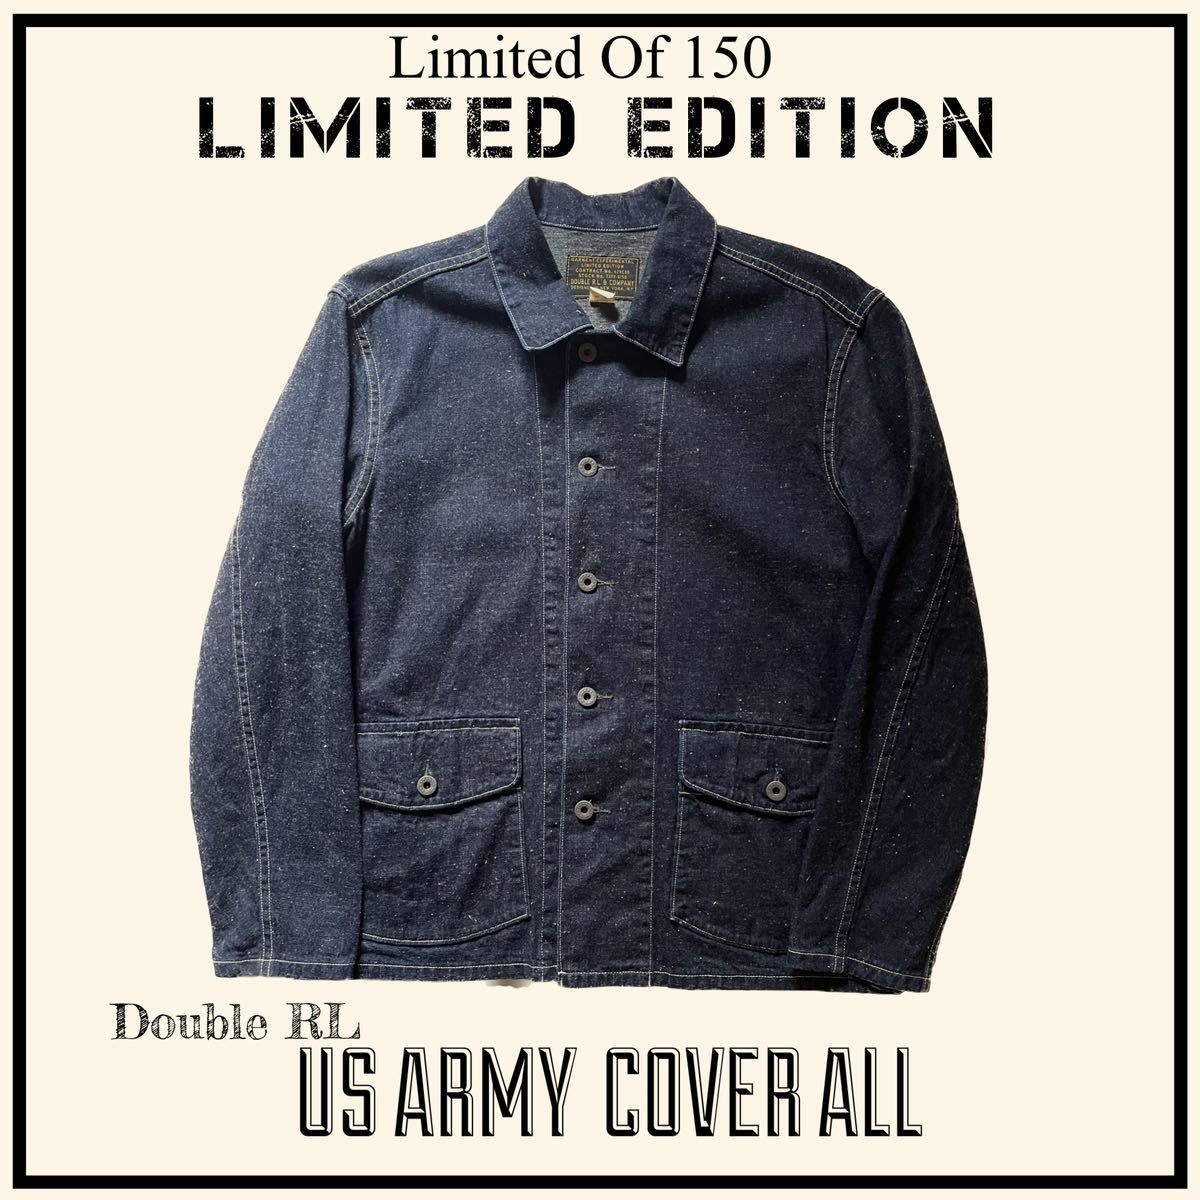 Limited Edition】RRL “US ARMY COVERALL” S 大戦モデル カバーオール 